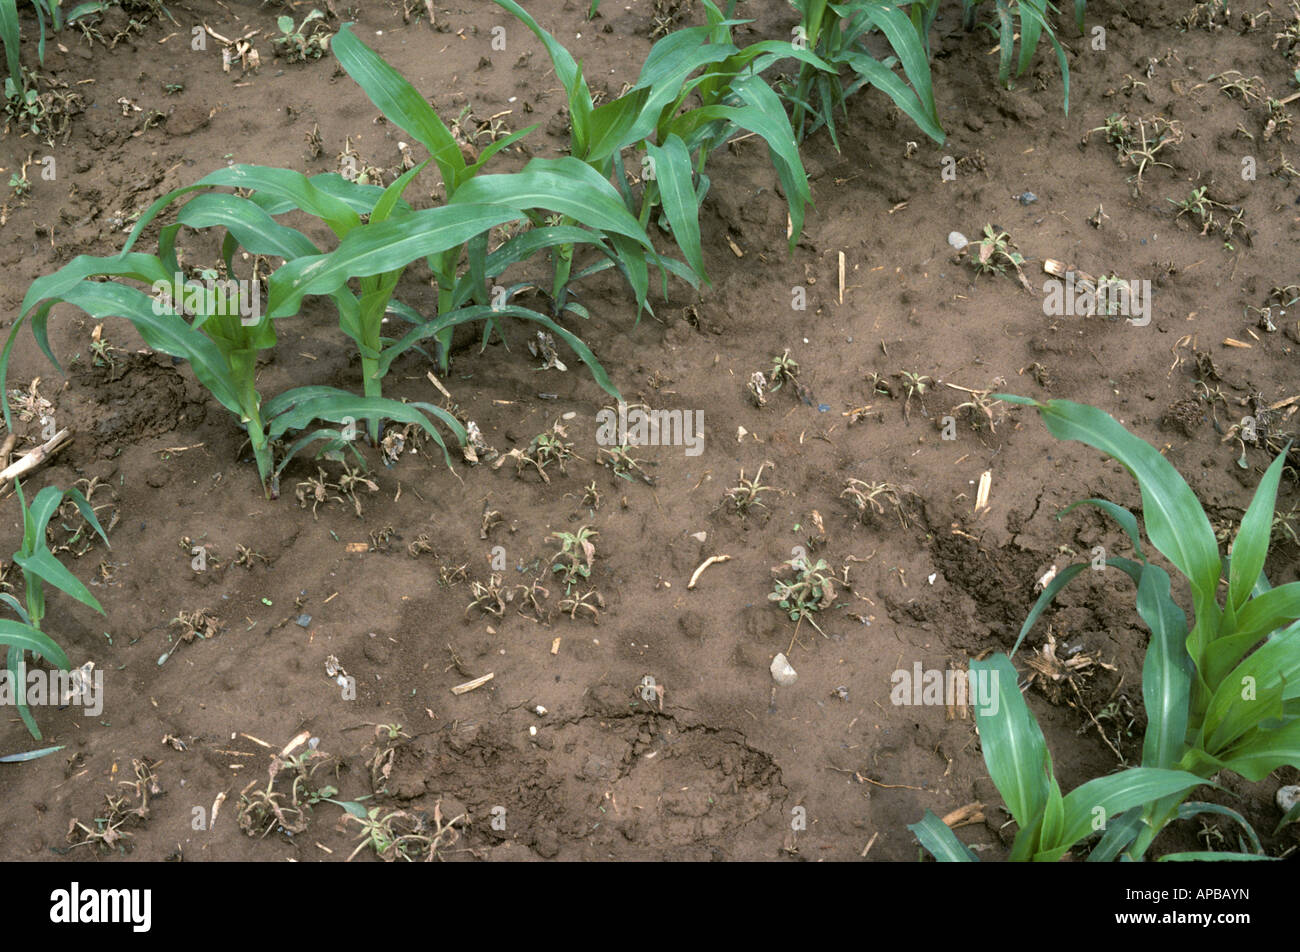 Selective control of broad leaved weeds in a young maize crop Alsace France Stock Photo